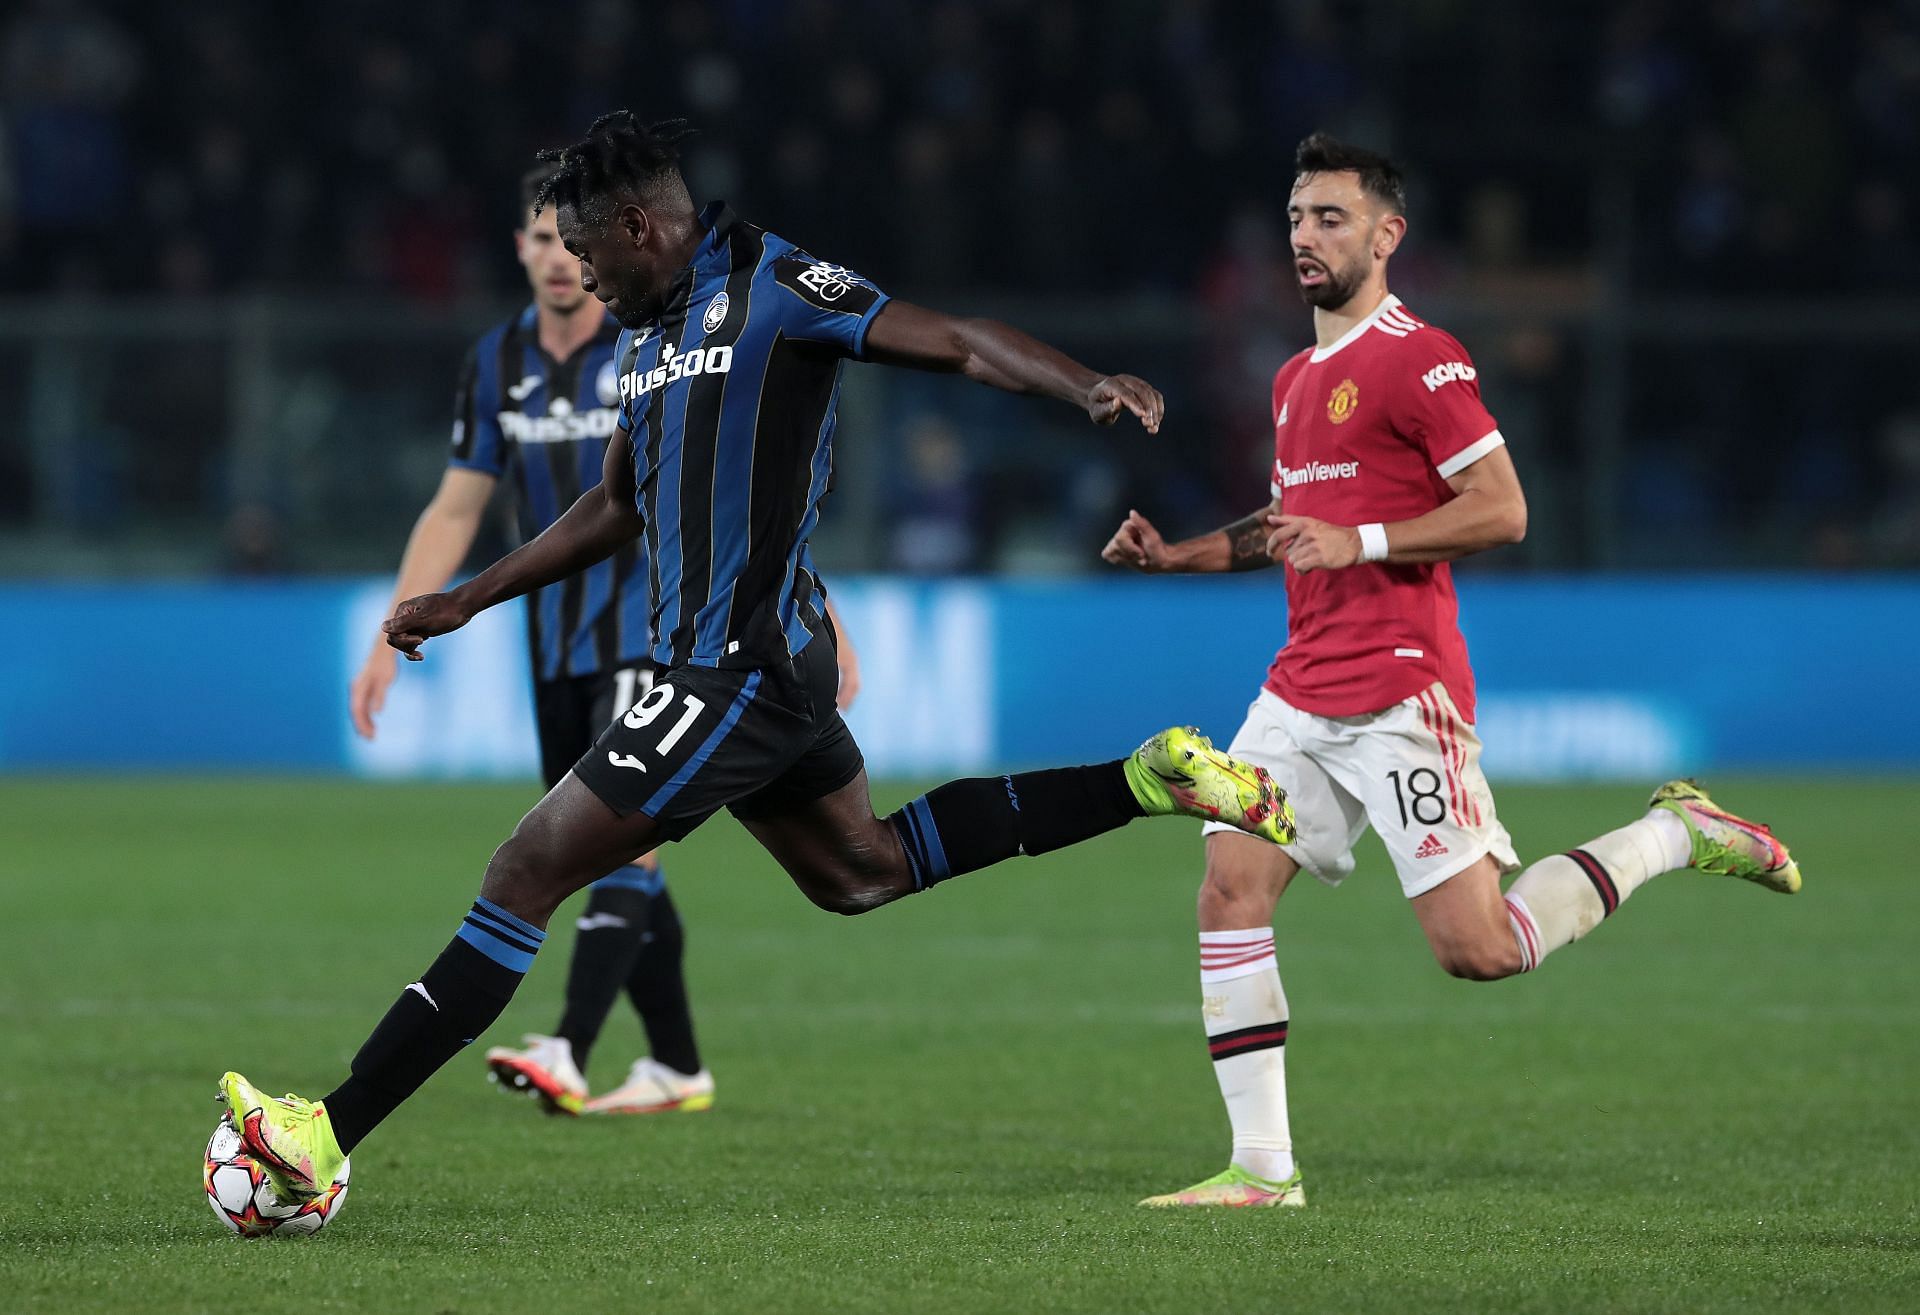 Atalanta were much the dominant side in their UEFA Champions League game against Manchester United